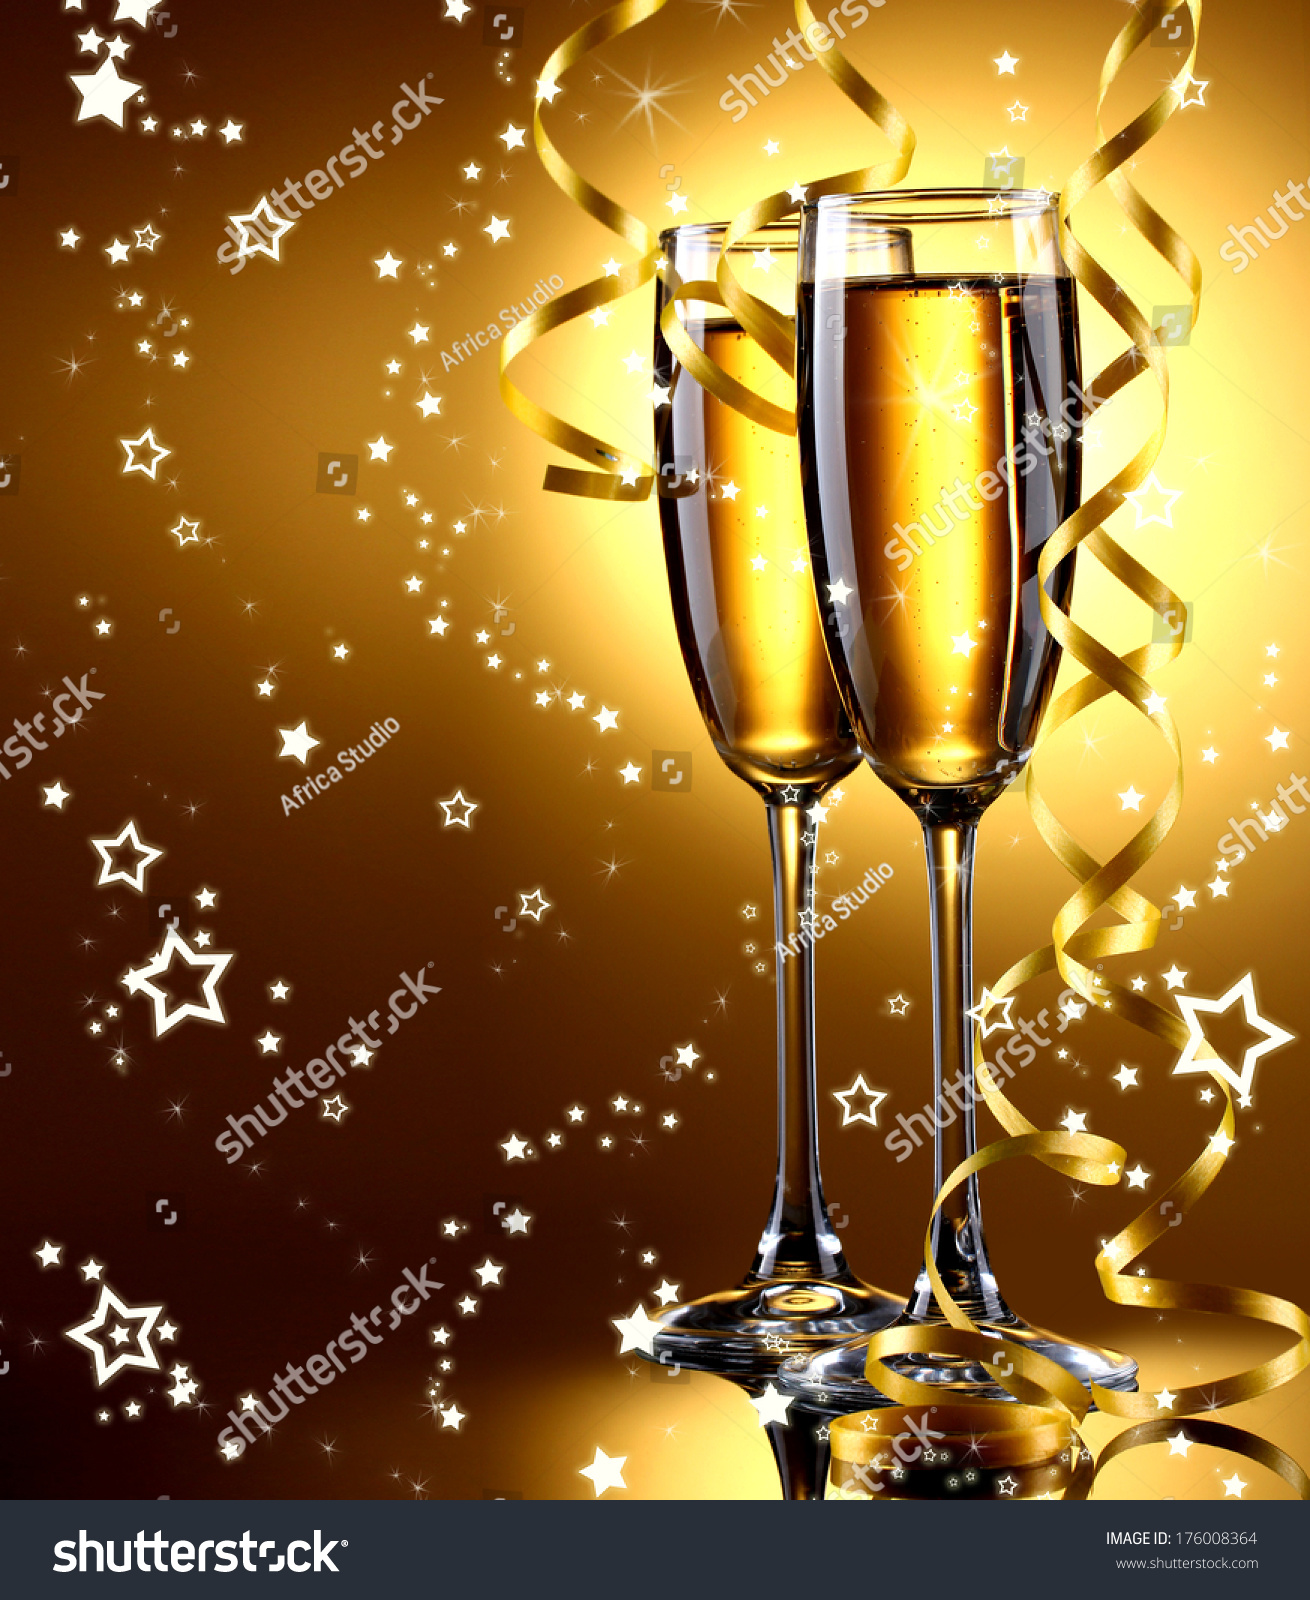 Two glasses of champagne on bright background with lights #176008364